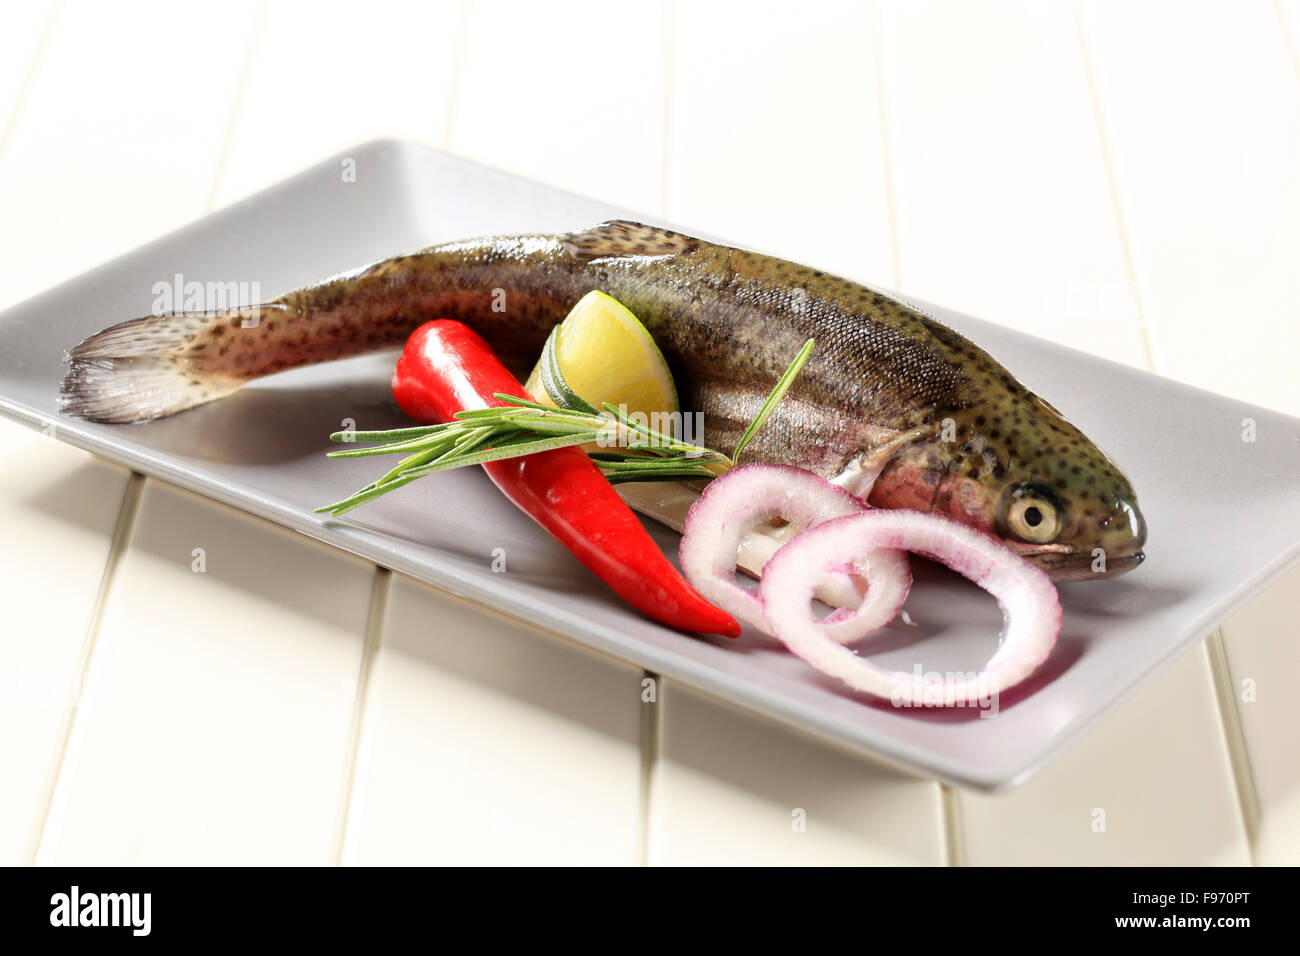 Fresh trout and other ingredients on a plate Stock Photo